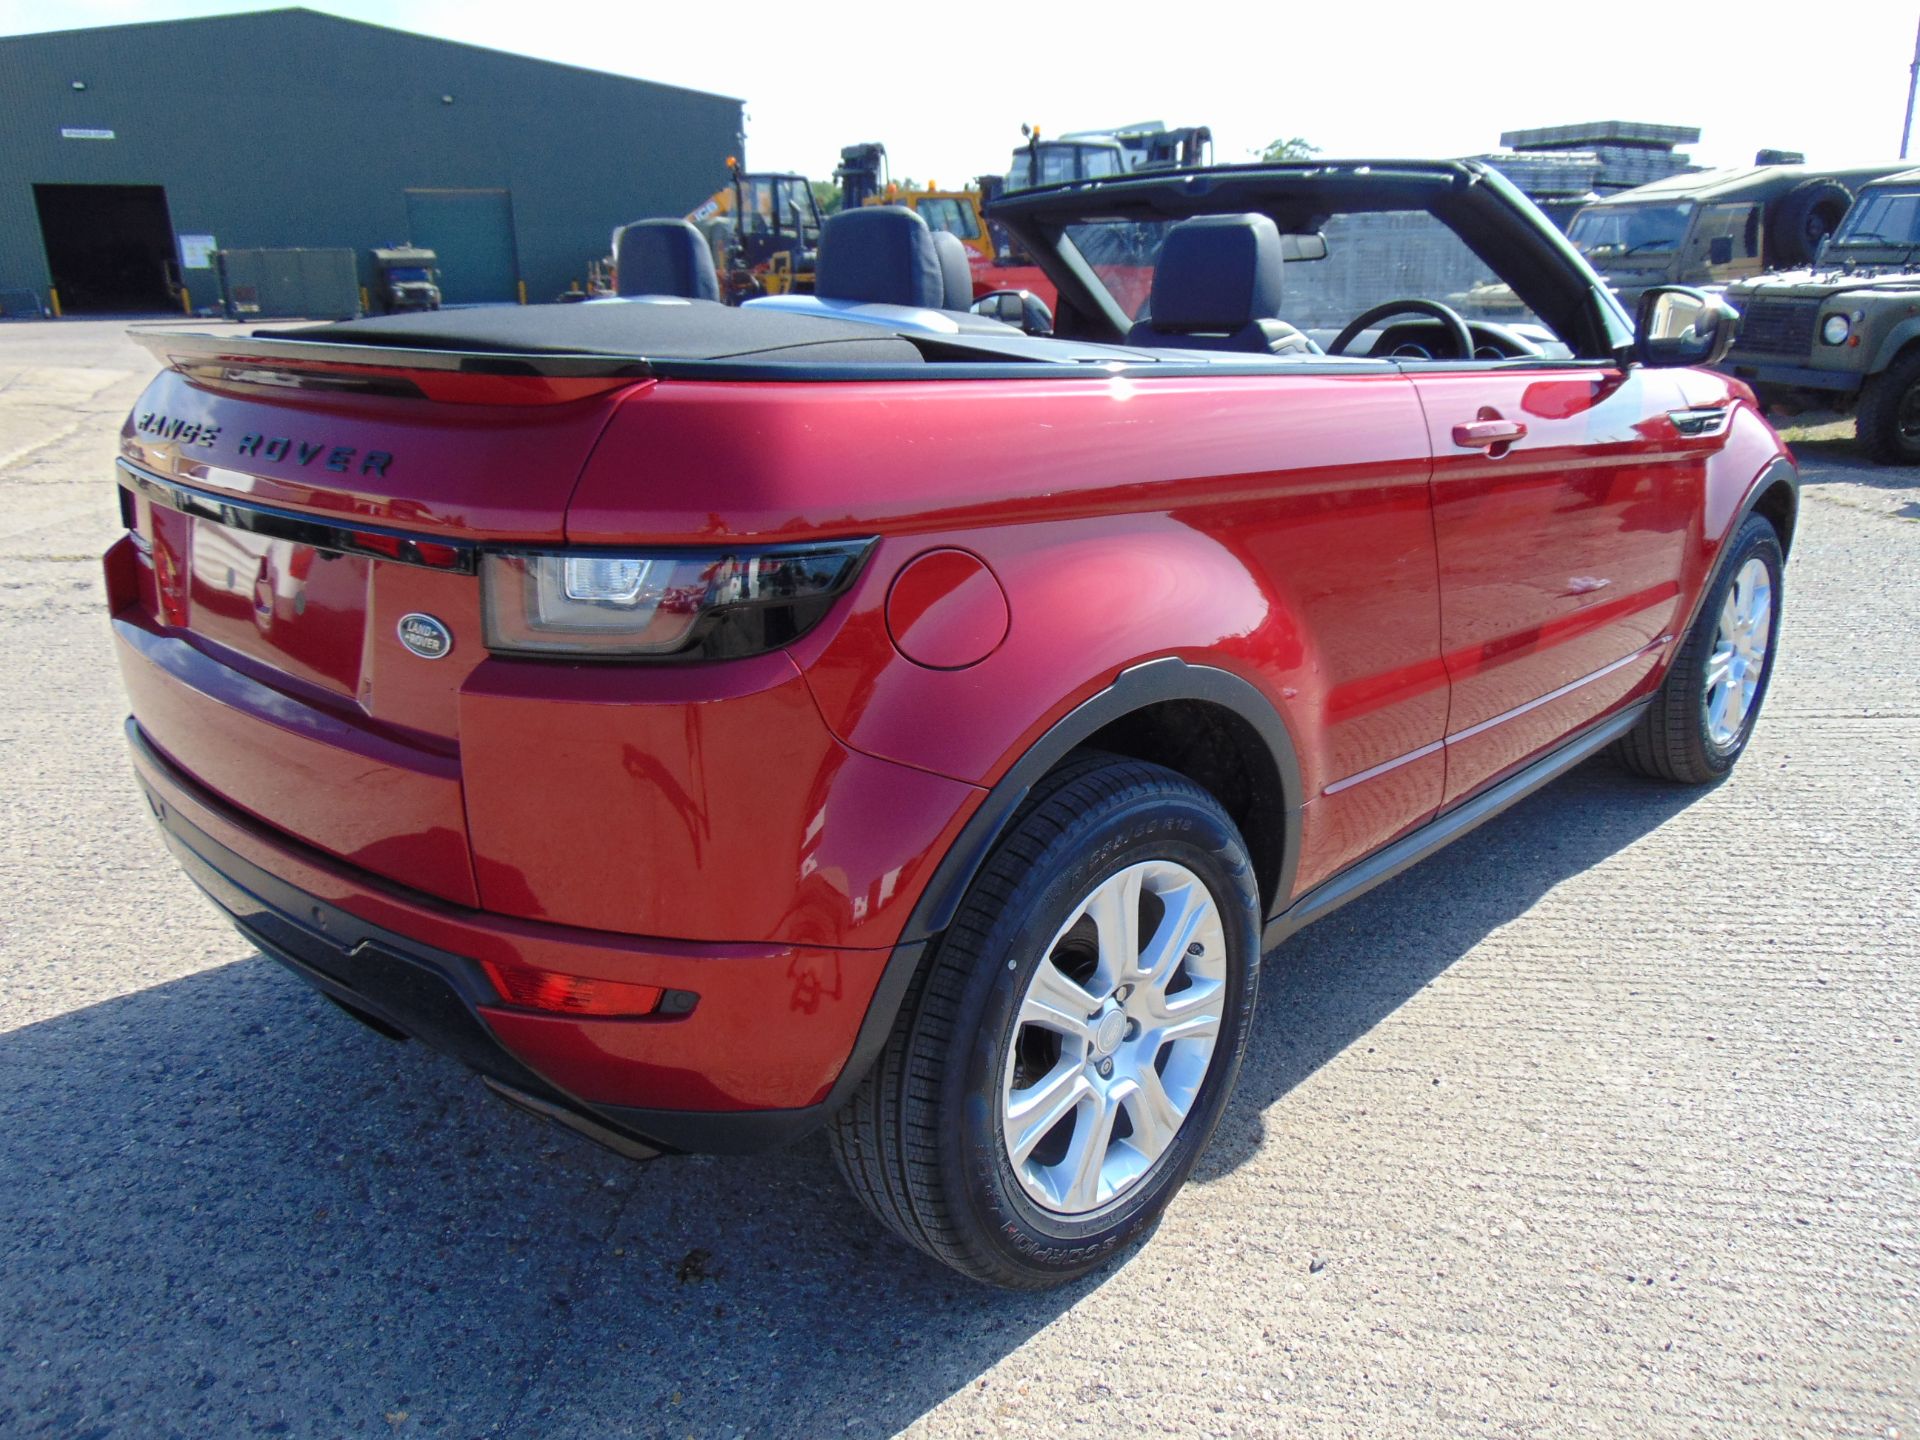 NEW UNUSED Range Rover Evoque 2.0 i4 HSE Dynamic Convertible - Image 4 of 39